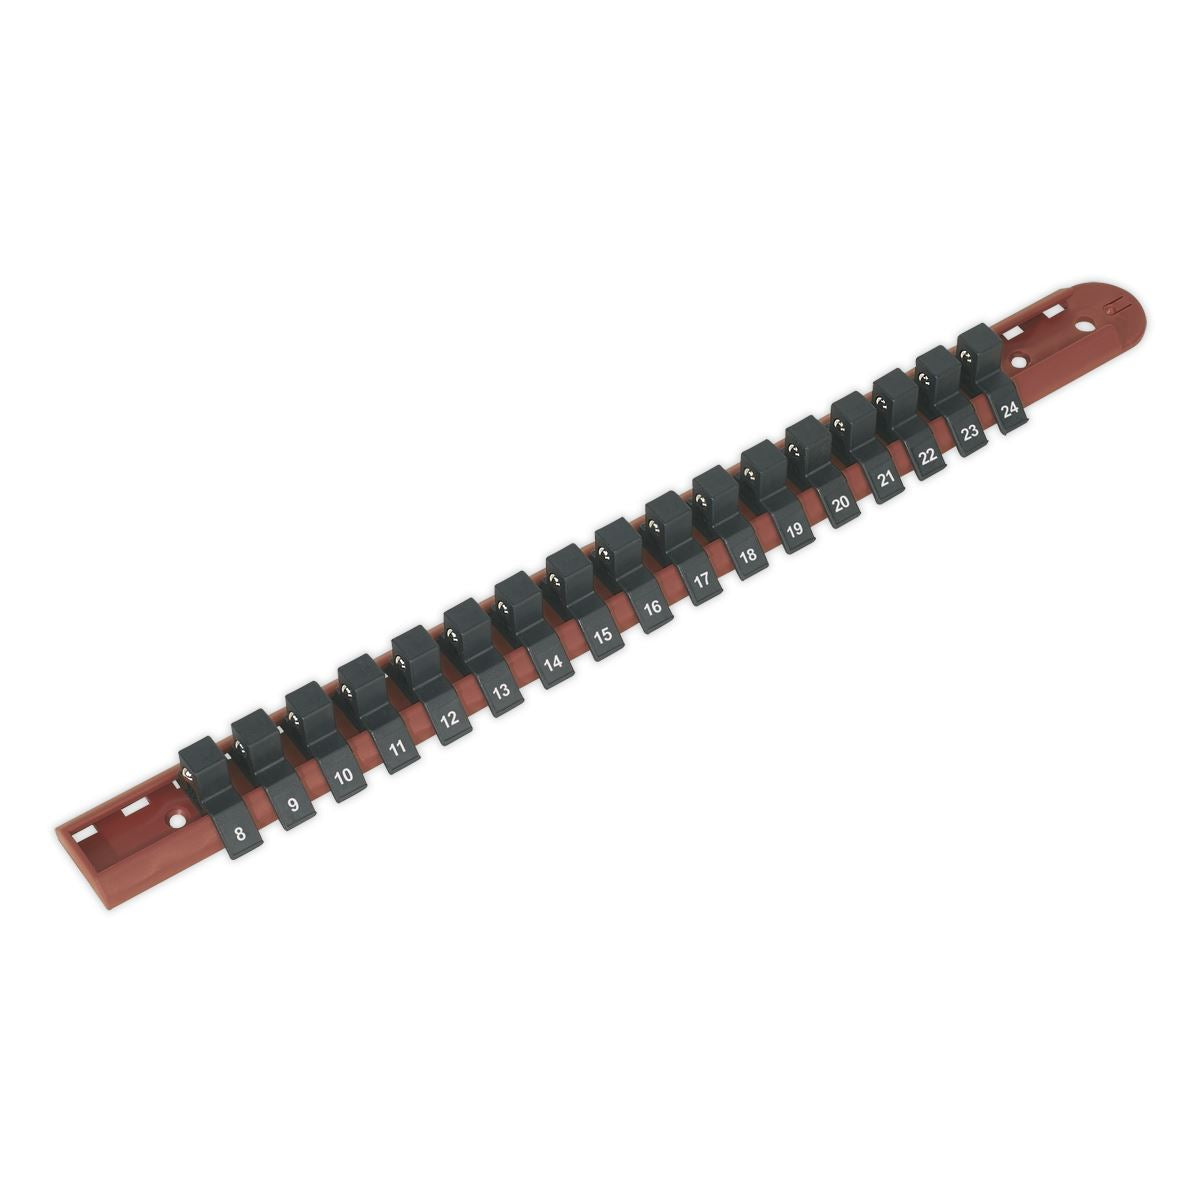 Sealey Premier Socket Retaining Rail with 17 Clips 1/2"Sq Drive